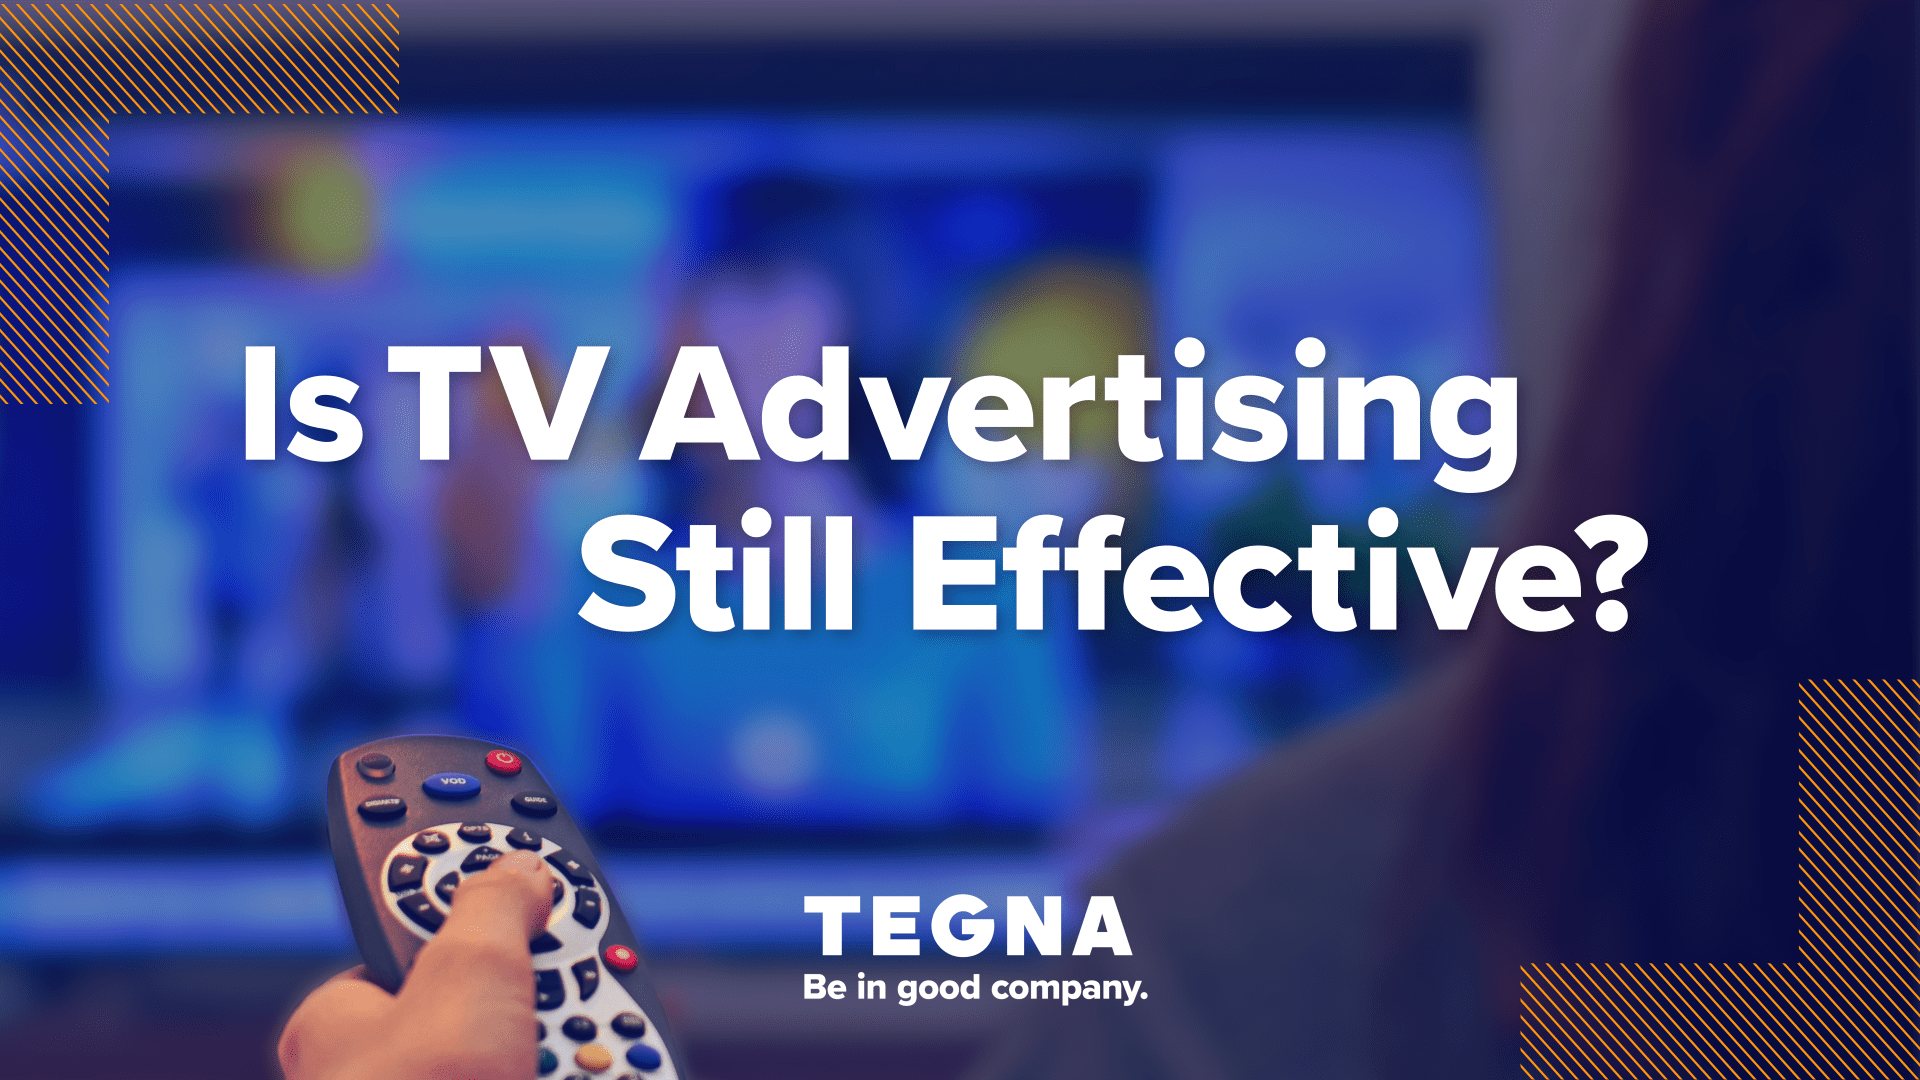 https://www.tegna.com/advertise/wp-content/uploads/sites/2/2023/02/45642-Is-TV-Advertising-Still-Effective_Featured-Image-FINAL-min.png